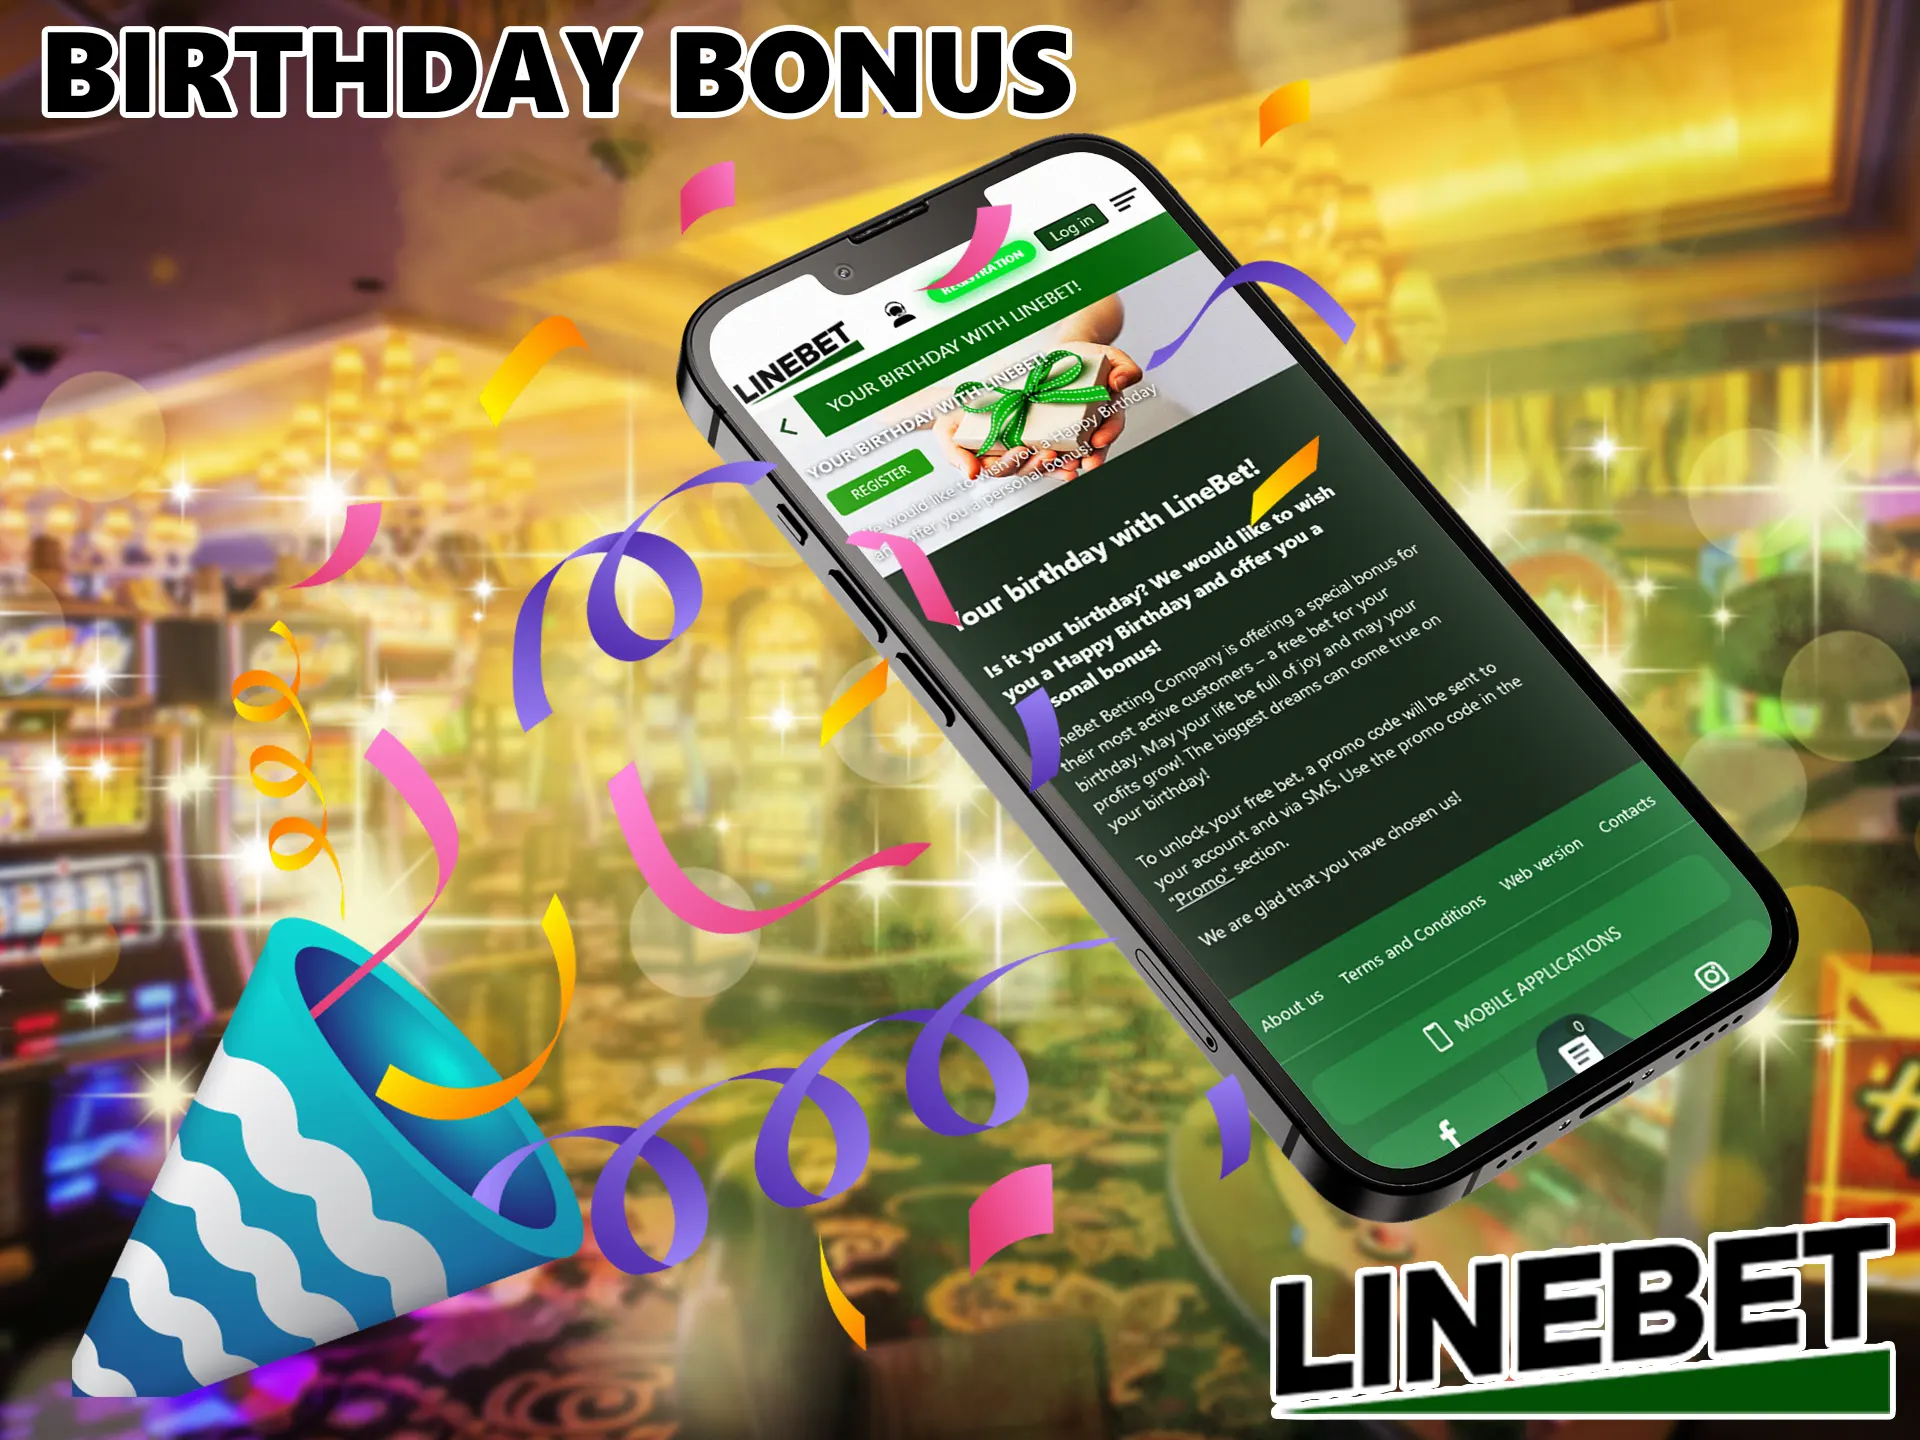 Every player in the casino can bet for free once a year, but you can only get this generous Linebet bonus once a year.